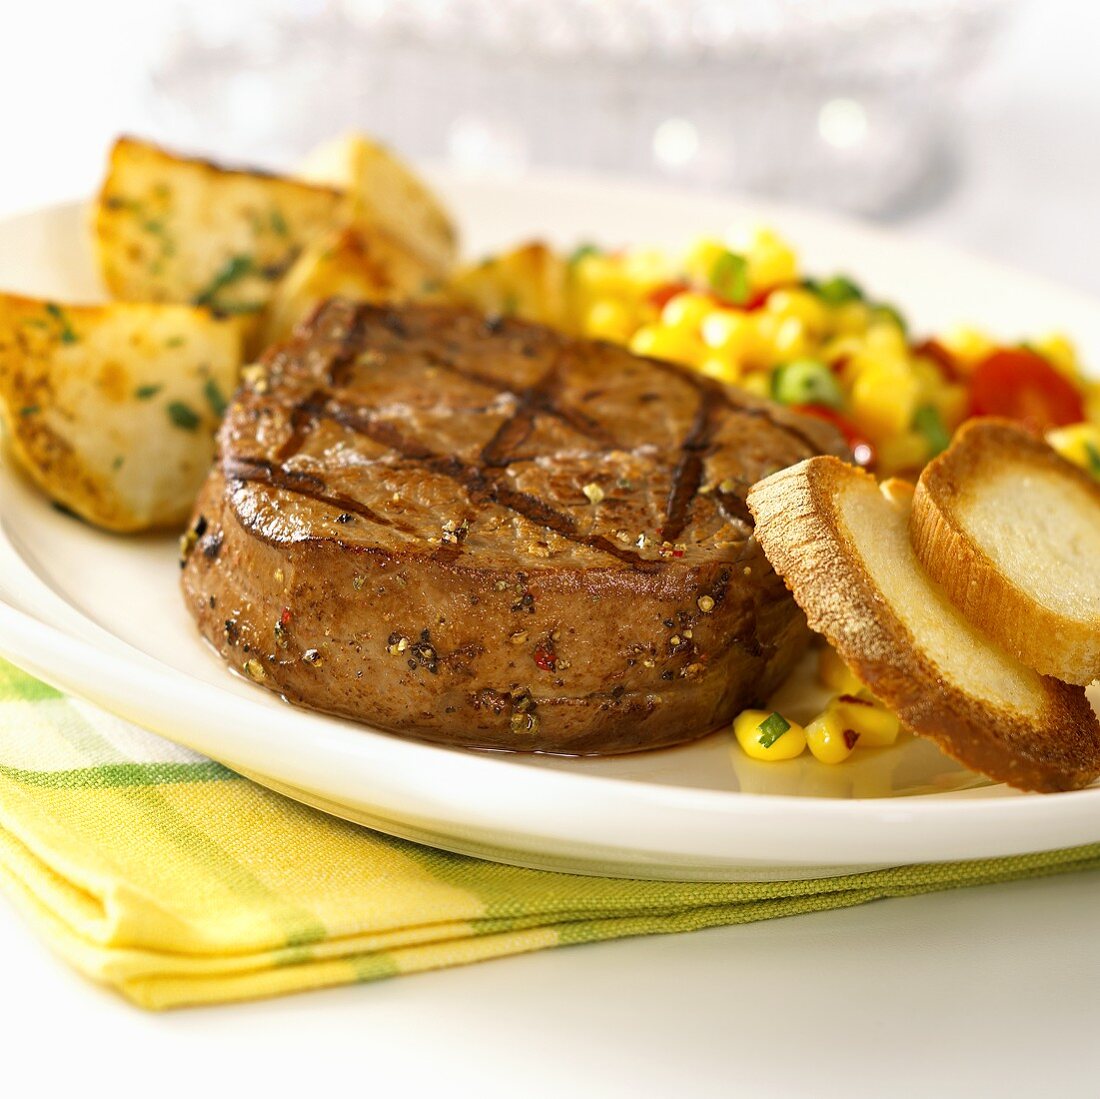 Barbecued beef fillet with accompaniments